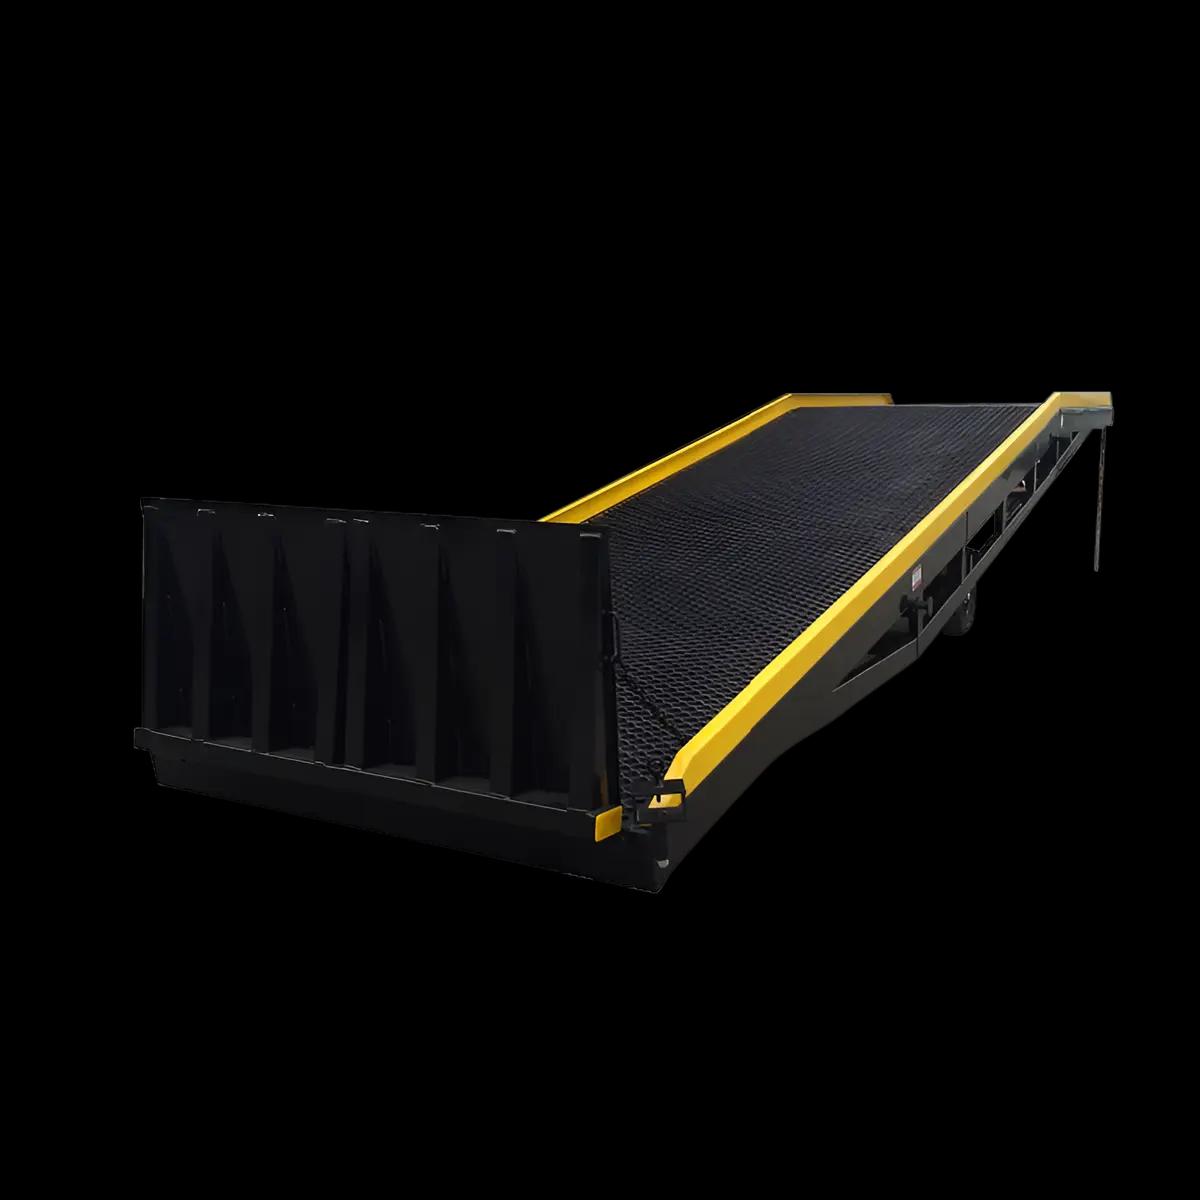 Value Industrial Mobile Loading Dock Ramp - 20 Tons capacity